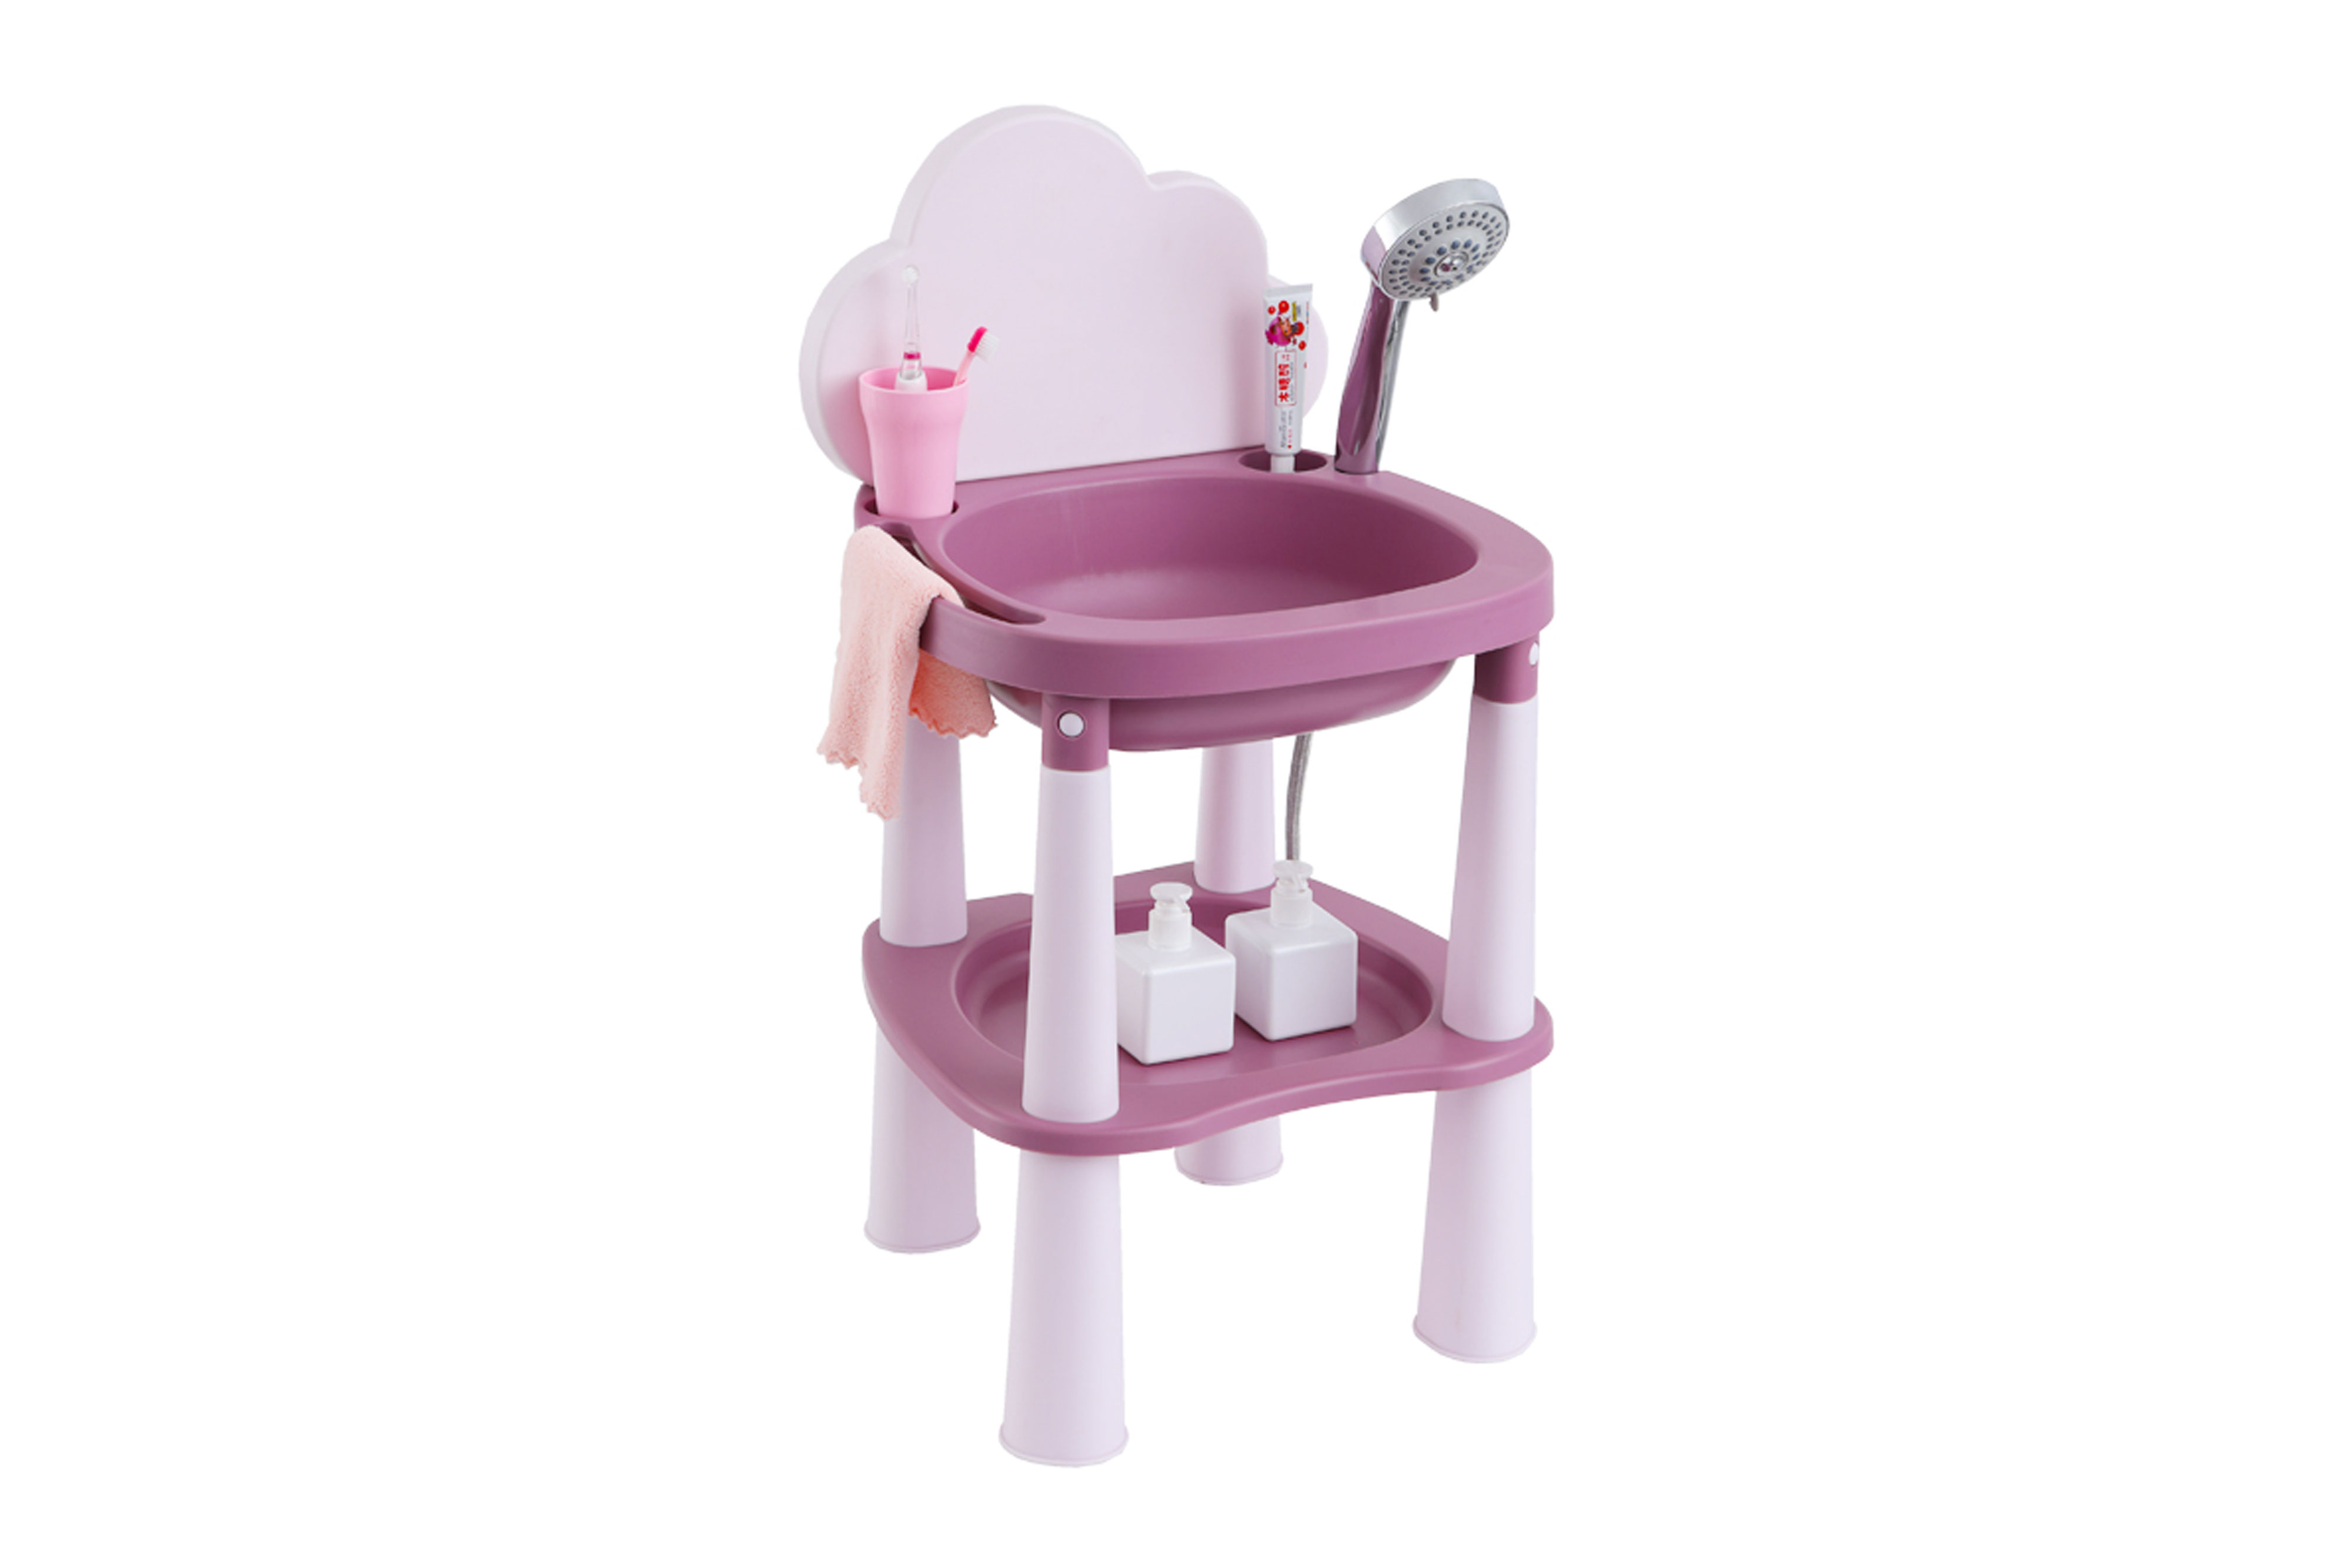 Advantages of Babyhood's Baby Washstand